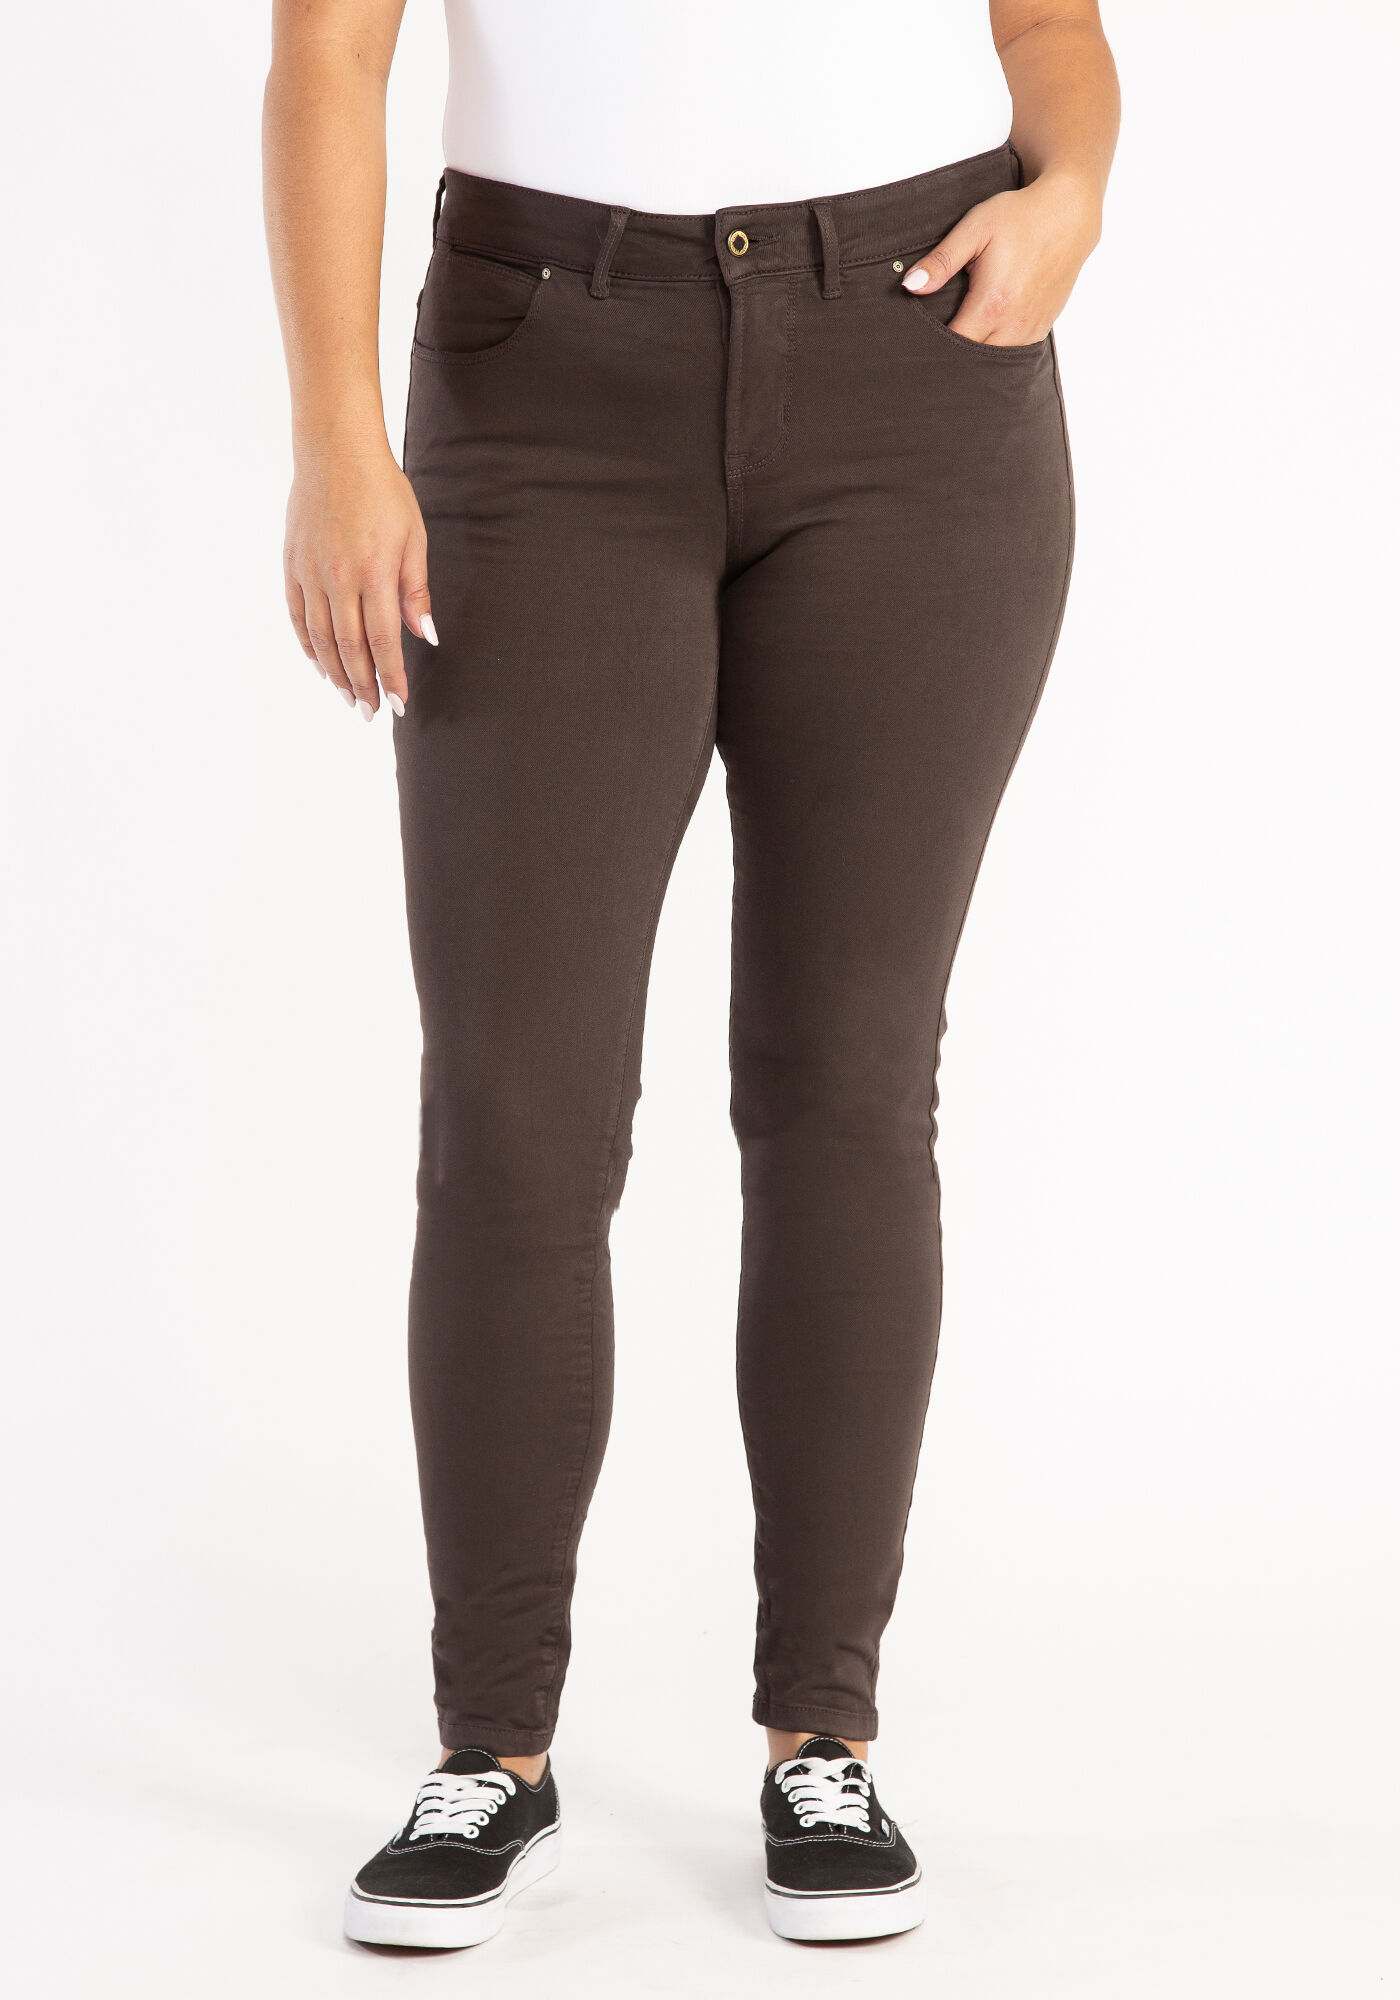 Buy NJ's Women Grey Slim fit Jeans Online at Low Prices in India -  Paytmmall.com